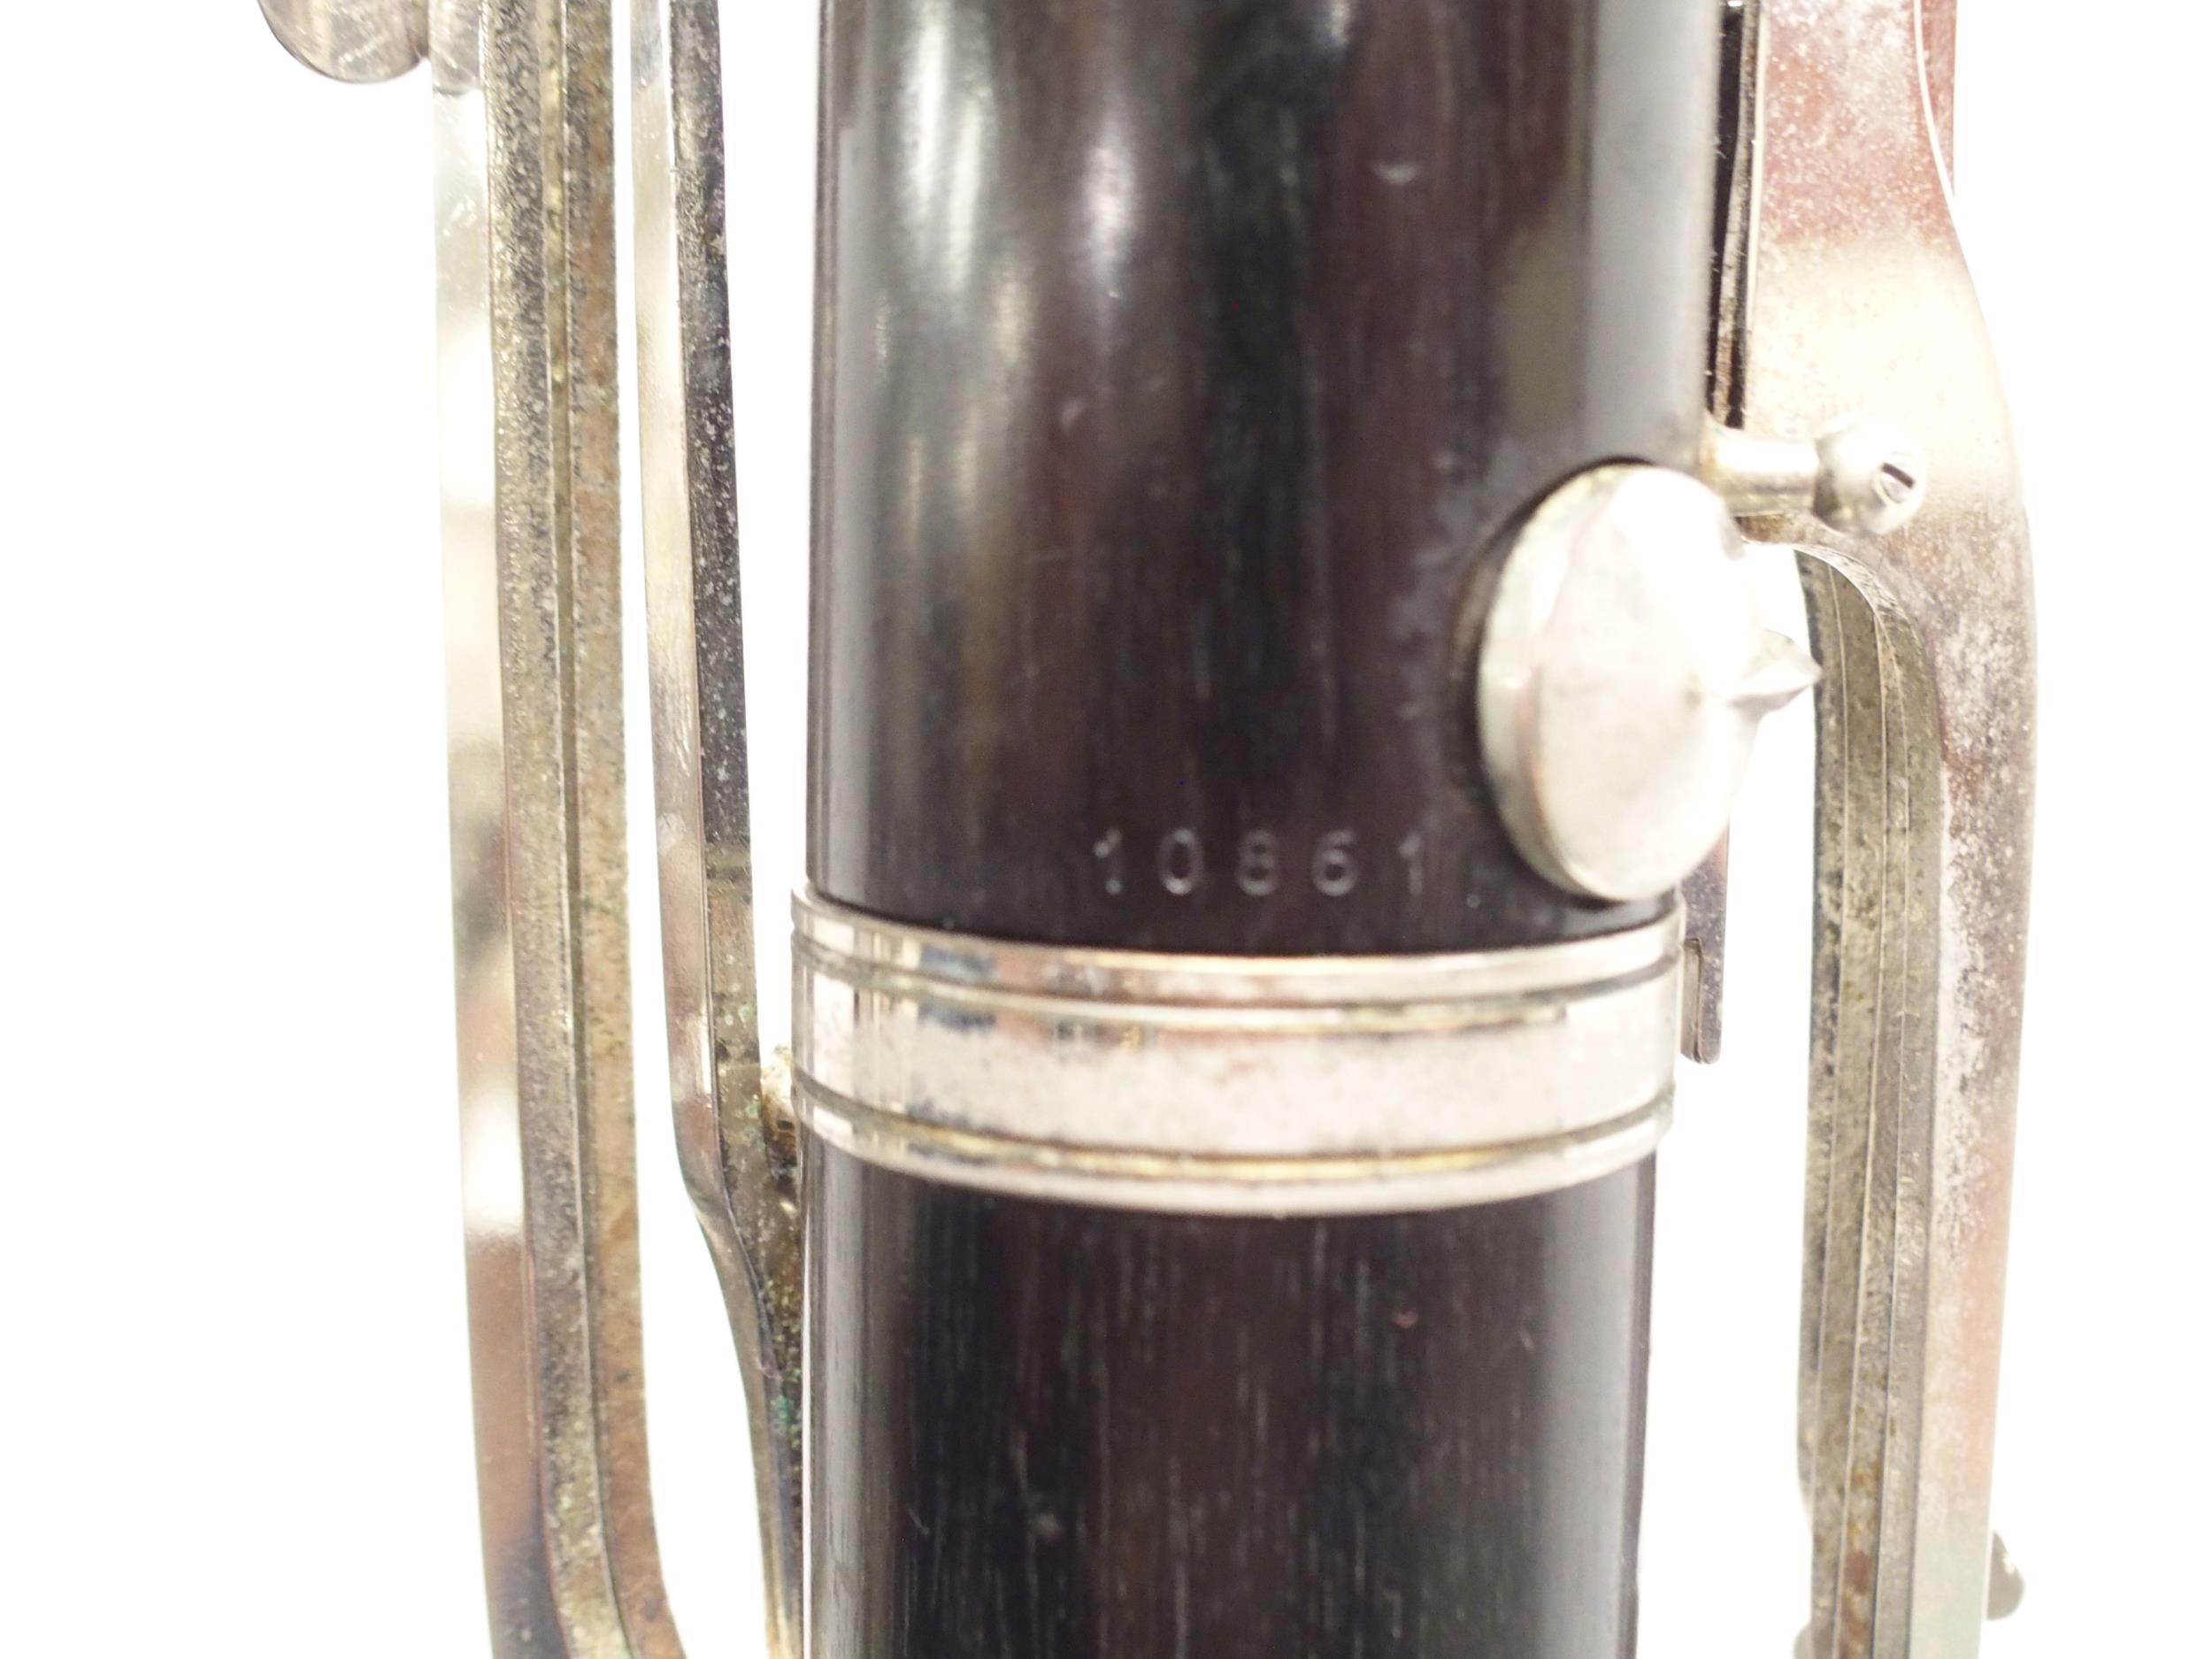 NOBLET PARIS GRENADILLA WOOD BASS CLARINET serial number 10861  Condition Report:Available upon - Image 10 of 10